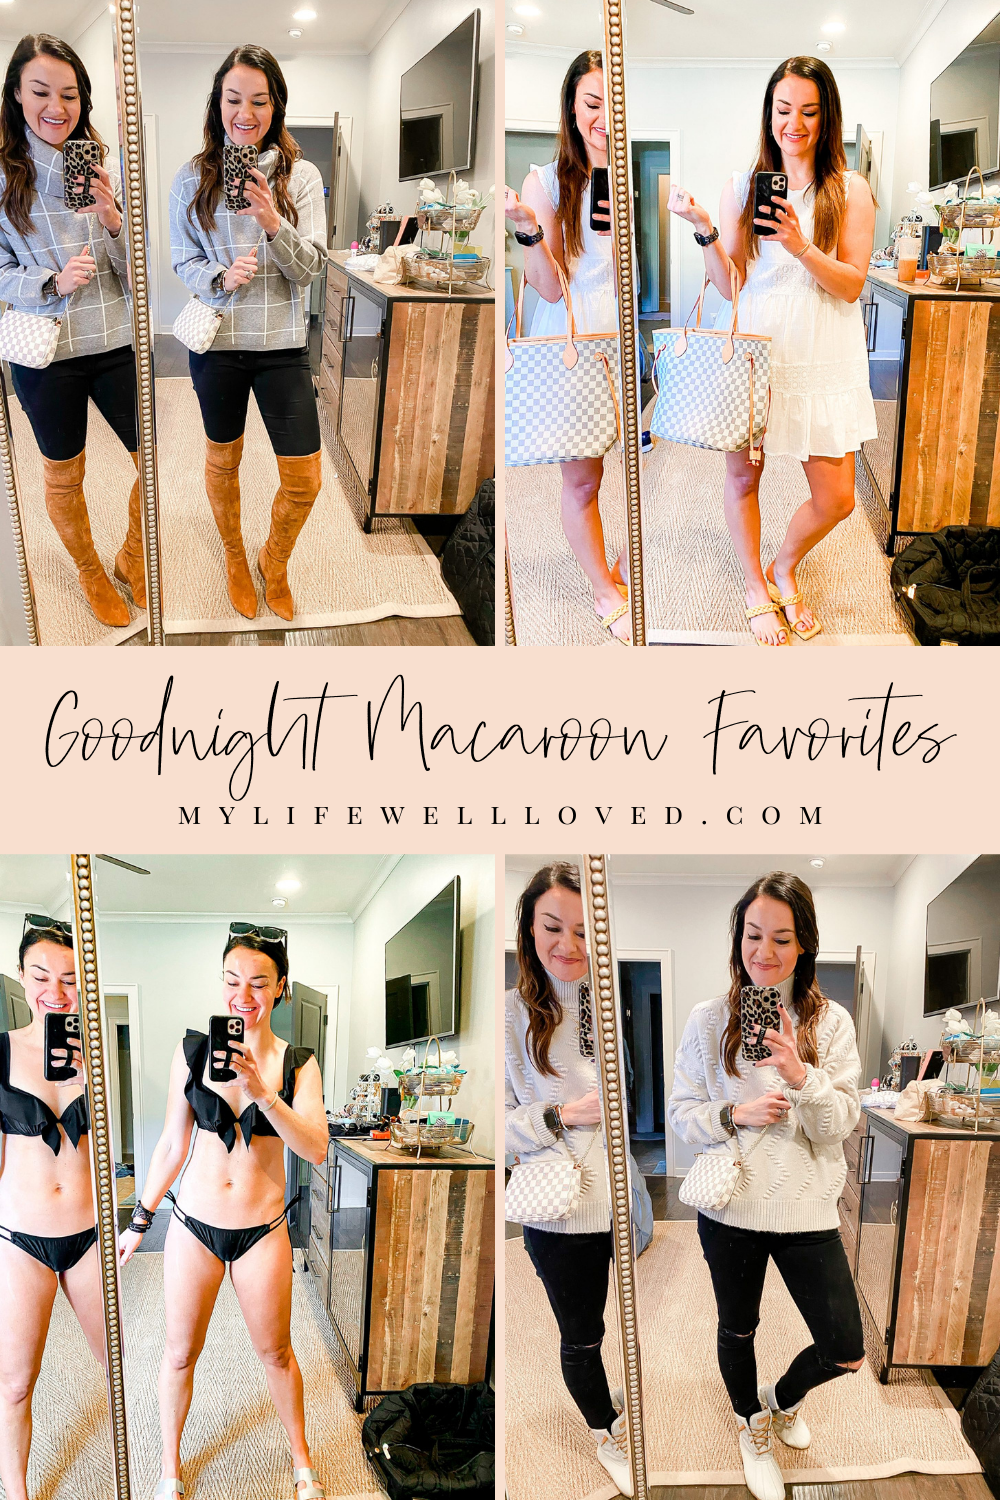 An Exclusive Goodnight Macaroon Coupon Code - Healthy By Heather Brown